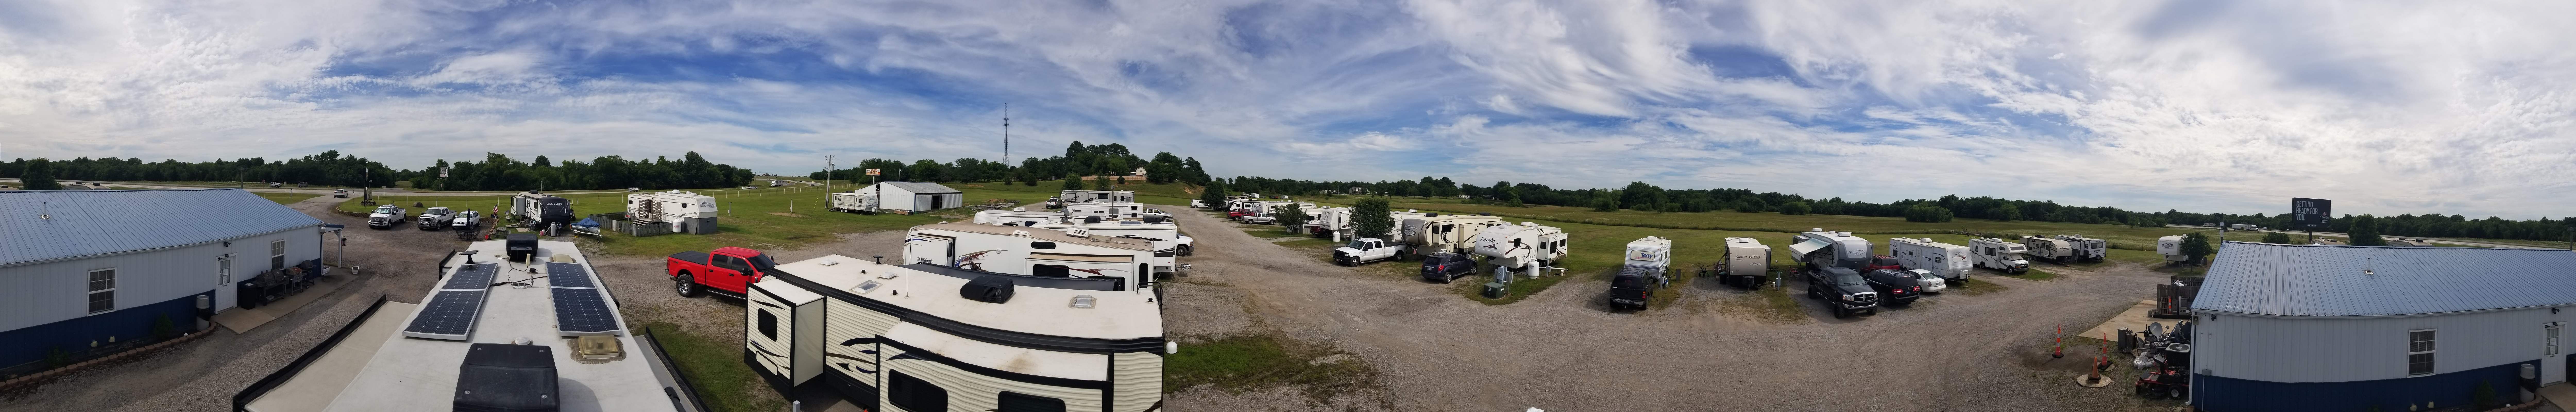 Camper submitted image from Country View RV Park - 3